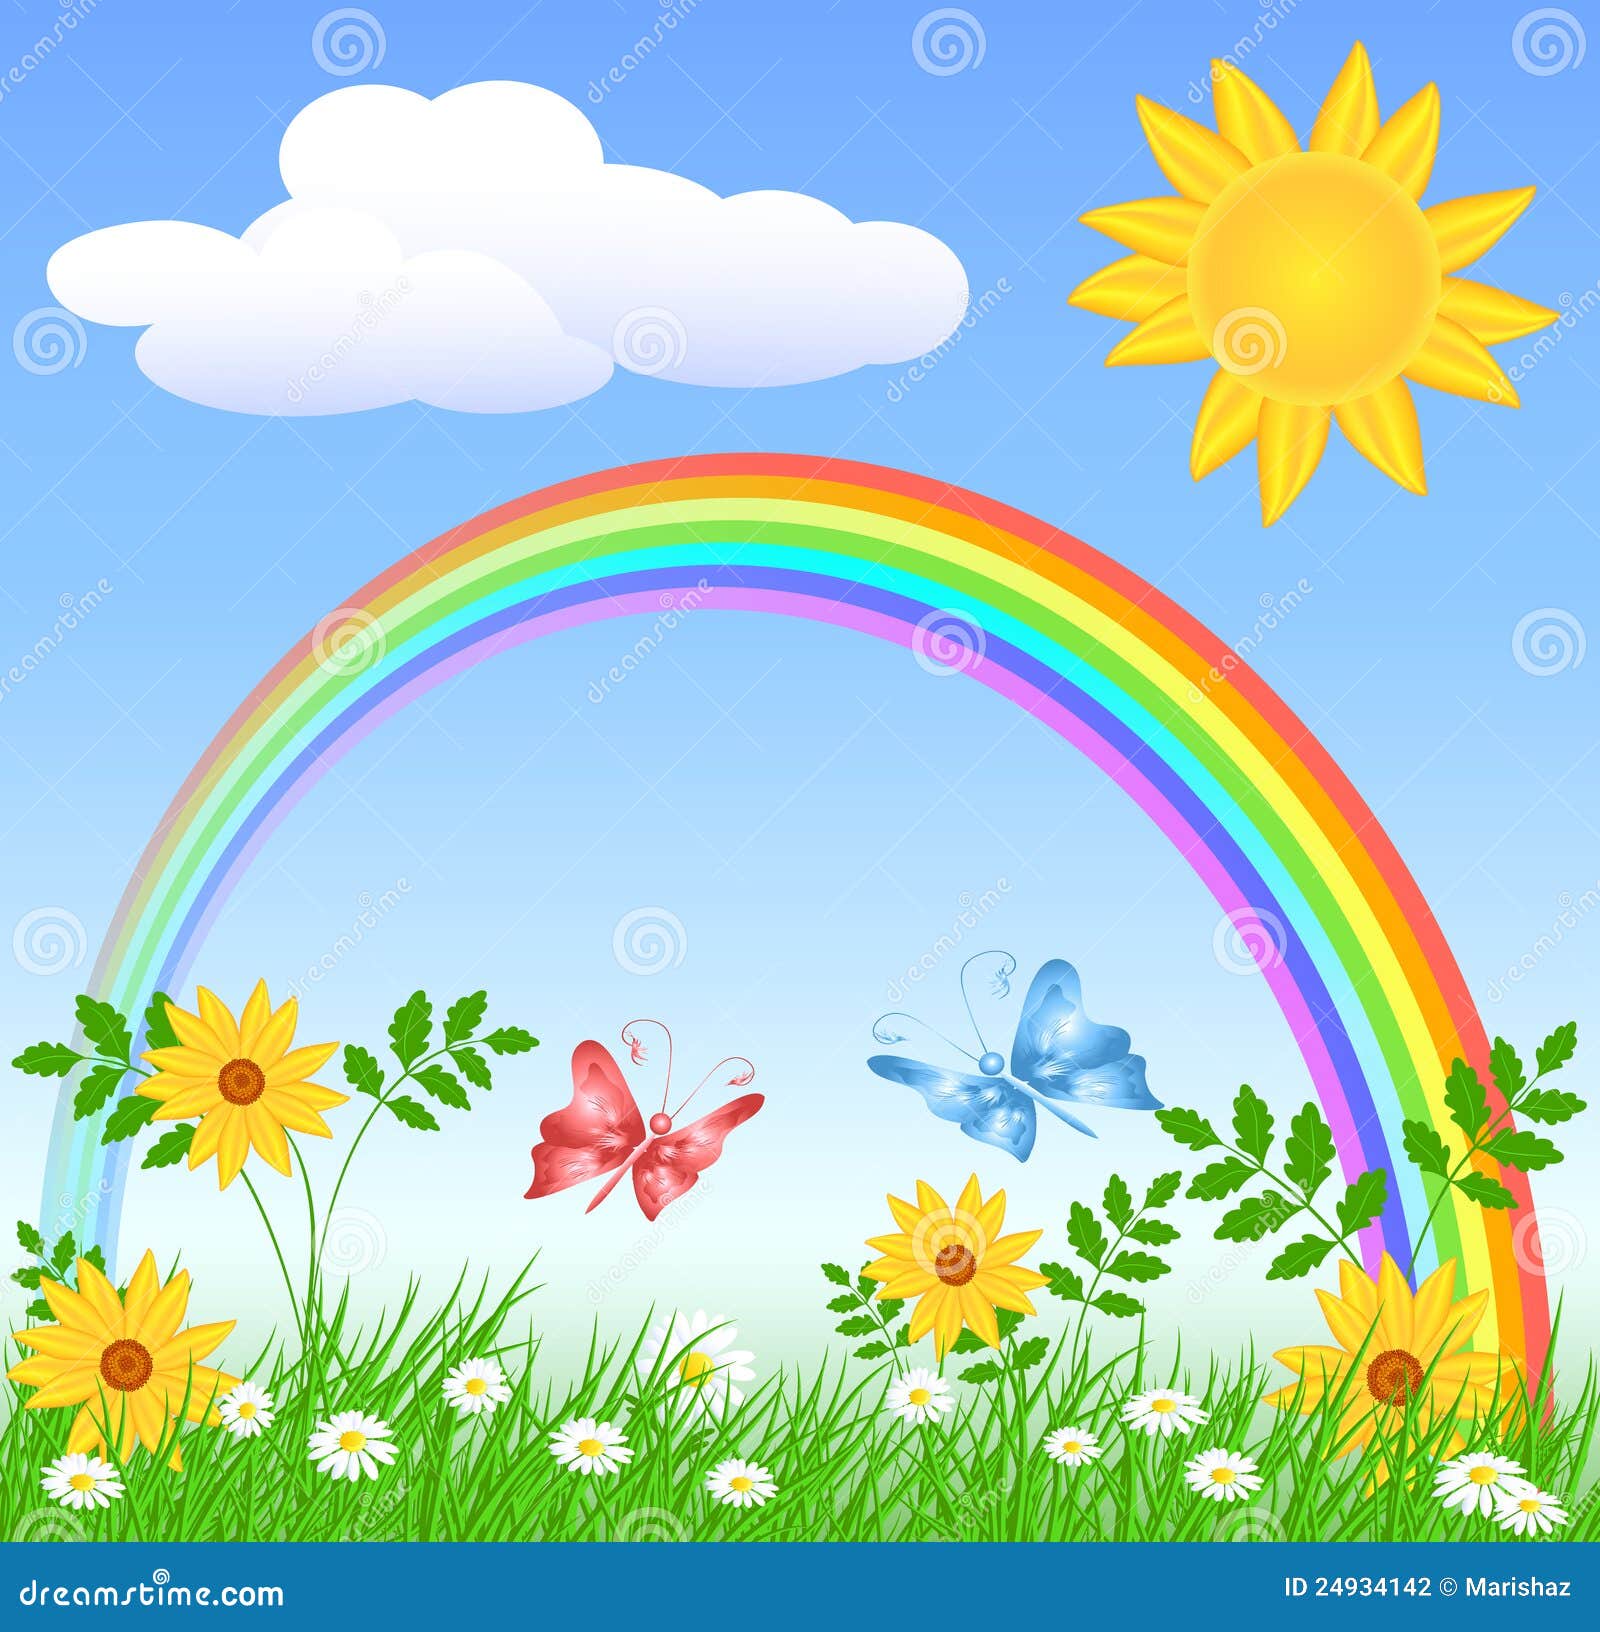 Flowers With Green Grass And Rainbow Stock Photography - Image 